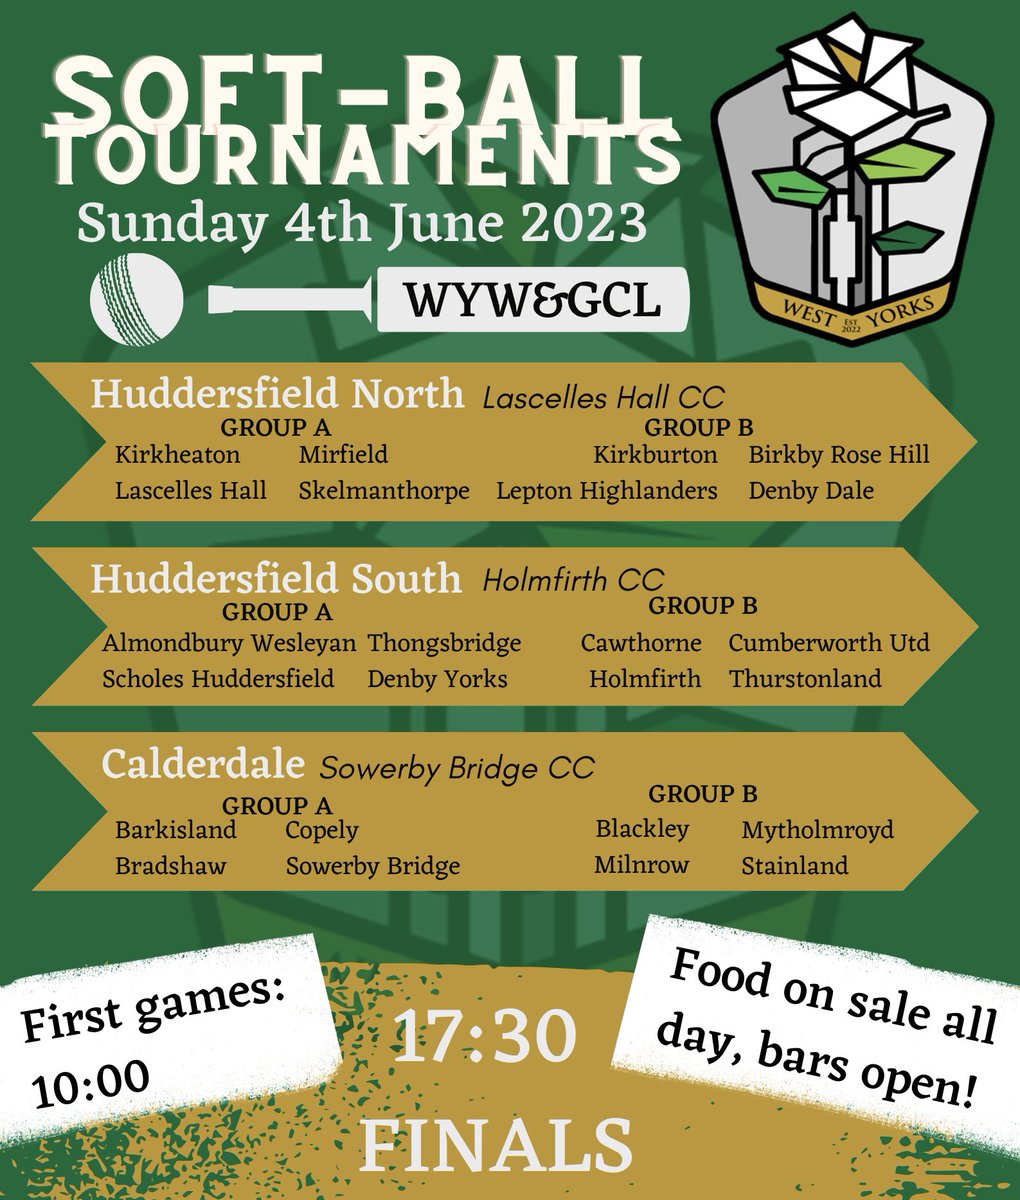 🏆 Our Soft-Ball Tournaments kick off this Sunday! All the information and venues above. Fixtures can be found on the website.

Good luck to all the teams taking part! 👏

#WYWGCL #SoftballCricket #WomensCricket #Yorkshire #Tournament